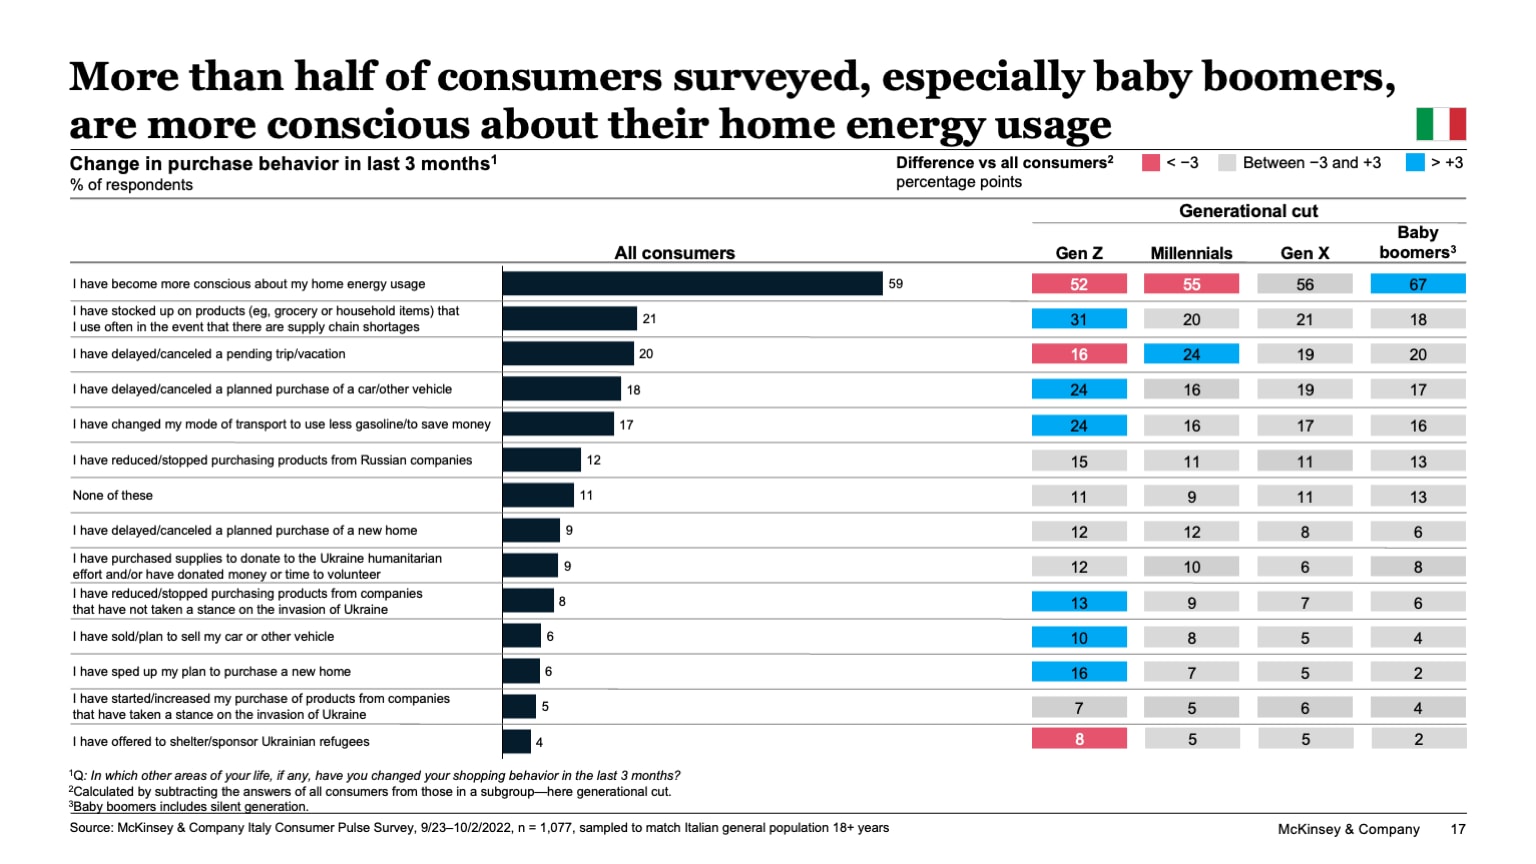 More than half of consumers surveyed, especially baby boomers, are more conscious about their home energy usage